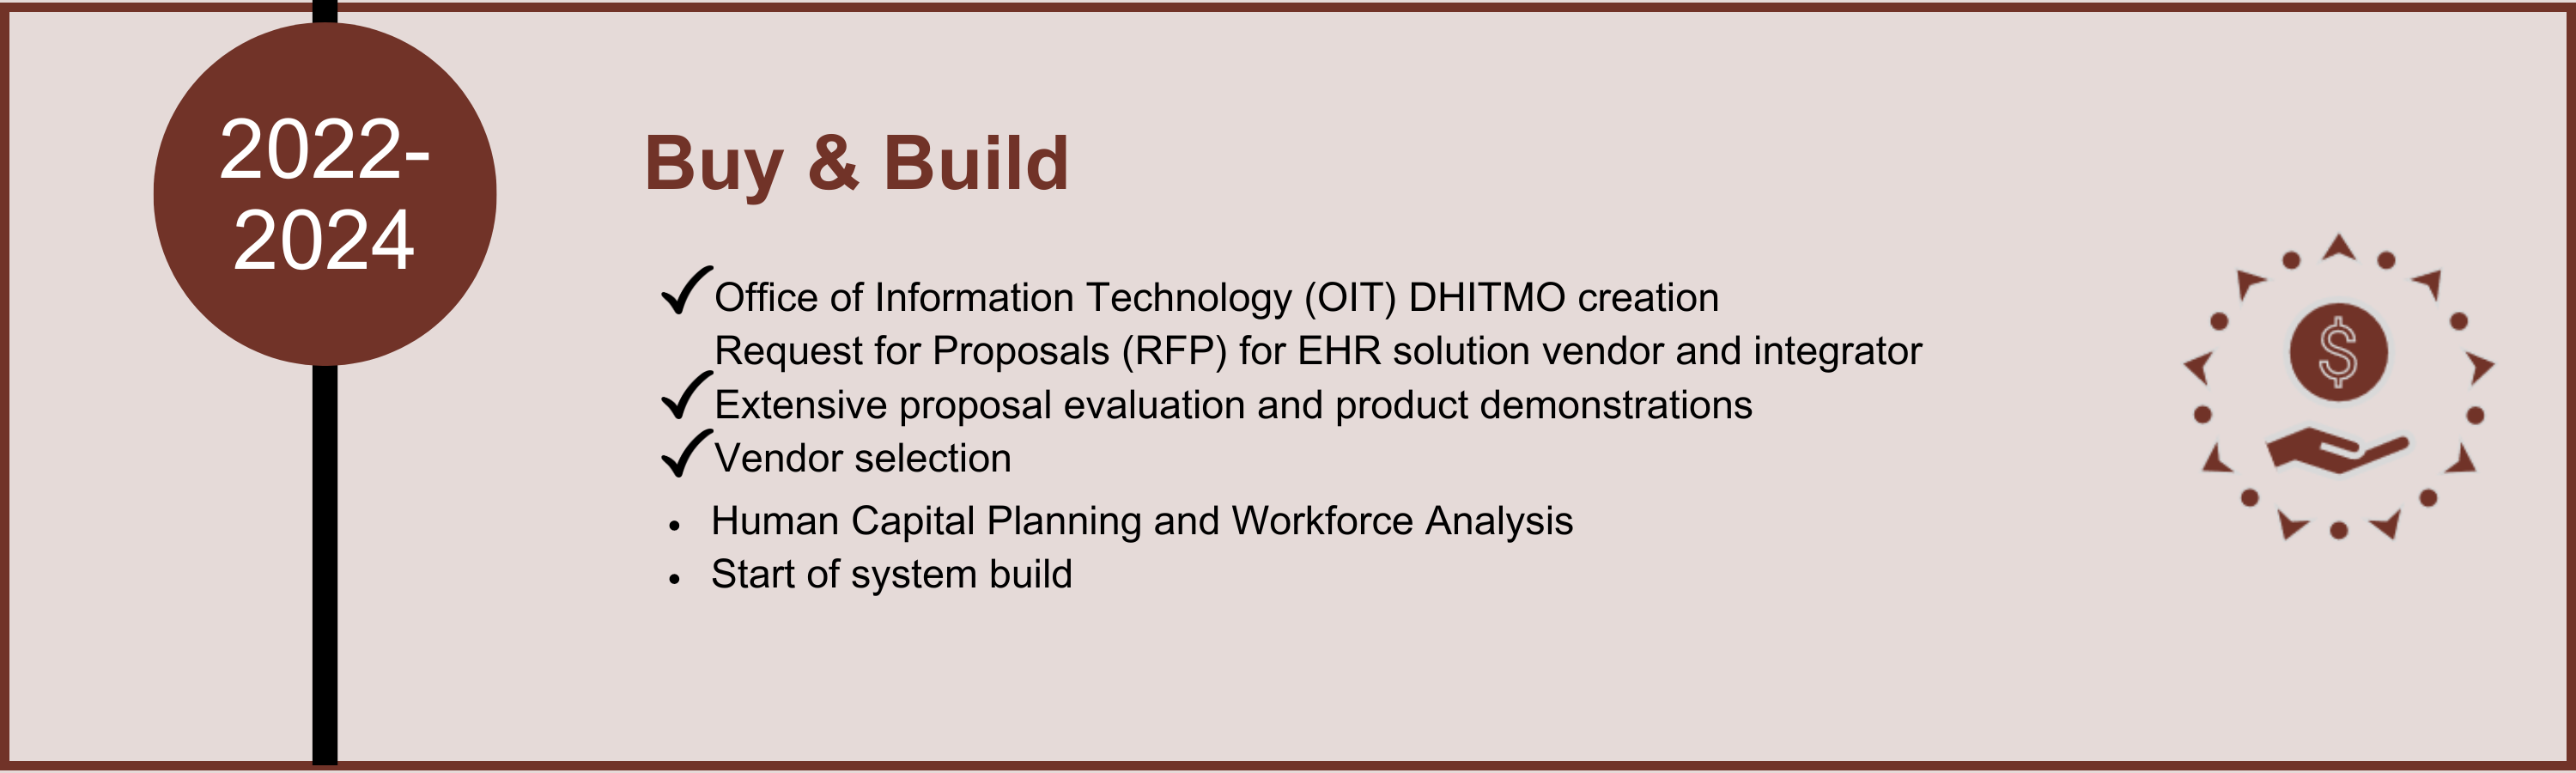 Buy and Build (2022-2024)
- Office of Information Technology (OIT) DHITMO creation 
- Request for Proposals (RFP) for EHR solution vendor and integrator
- Extensive proposal evaluation and product demonstrations
- Vendor selection
- Human Capital Planning and Workforce Analysis
- Start of system build
